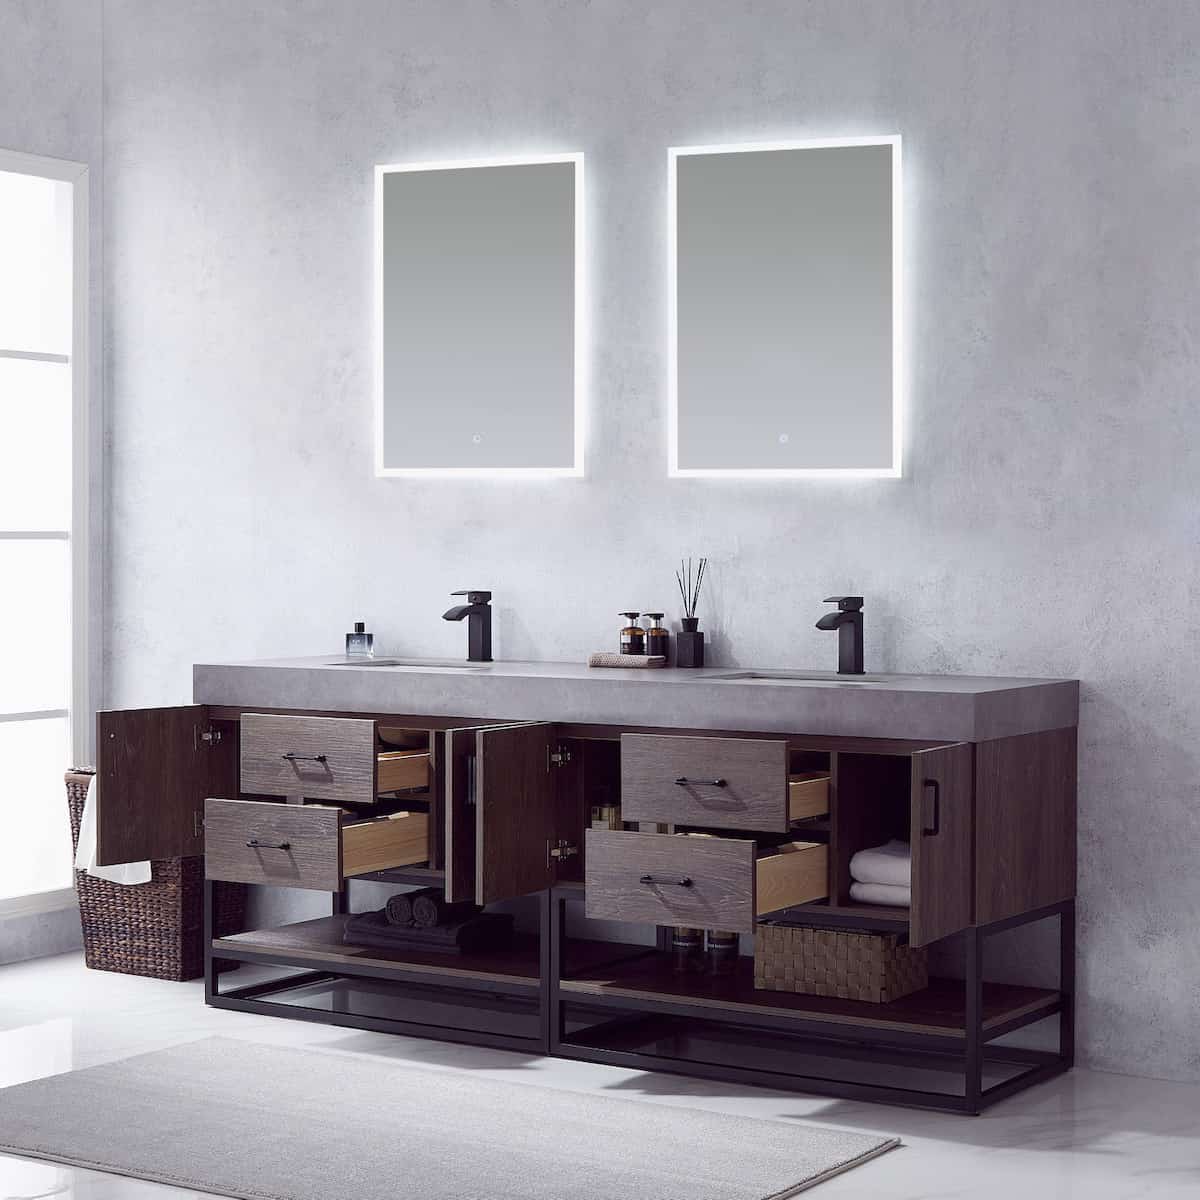 Vinnova Alistair 84 Inch Freestanding Double Sink Bath Vanity in North Carolina Oak and Matte Black Frame with Grey Sintered Stone Top With Mirrors Inside 789084B-NC-WK